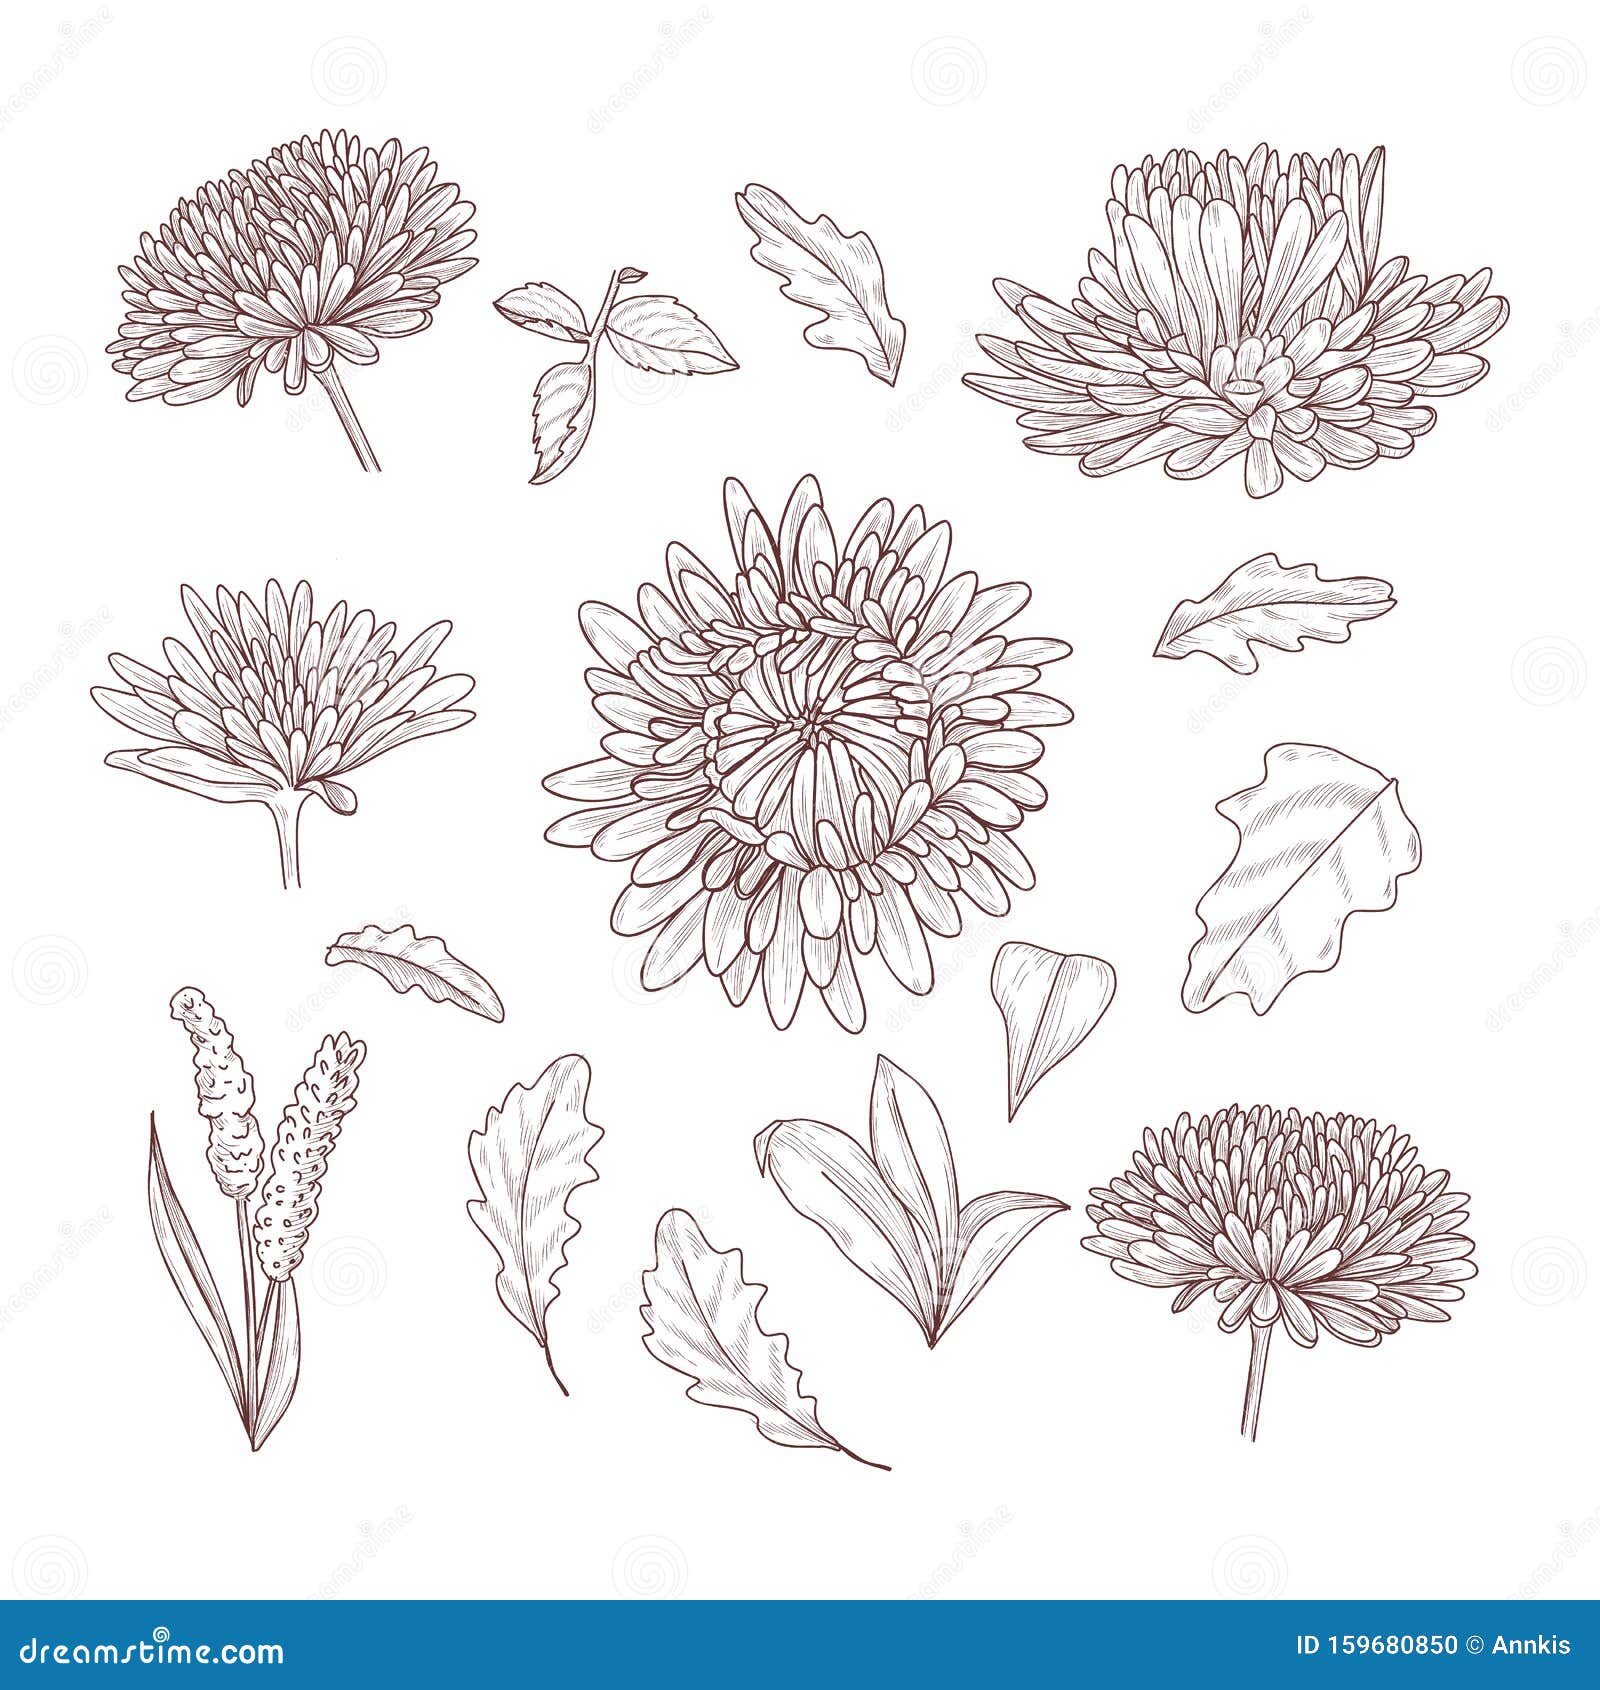 Hand Drawn Sketch Of Aster Flowers And Leaves Line Art Design Stock Vector Illustration Of Repeat Line 159680850